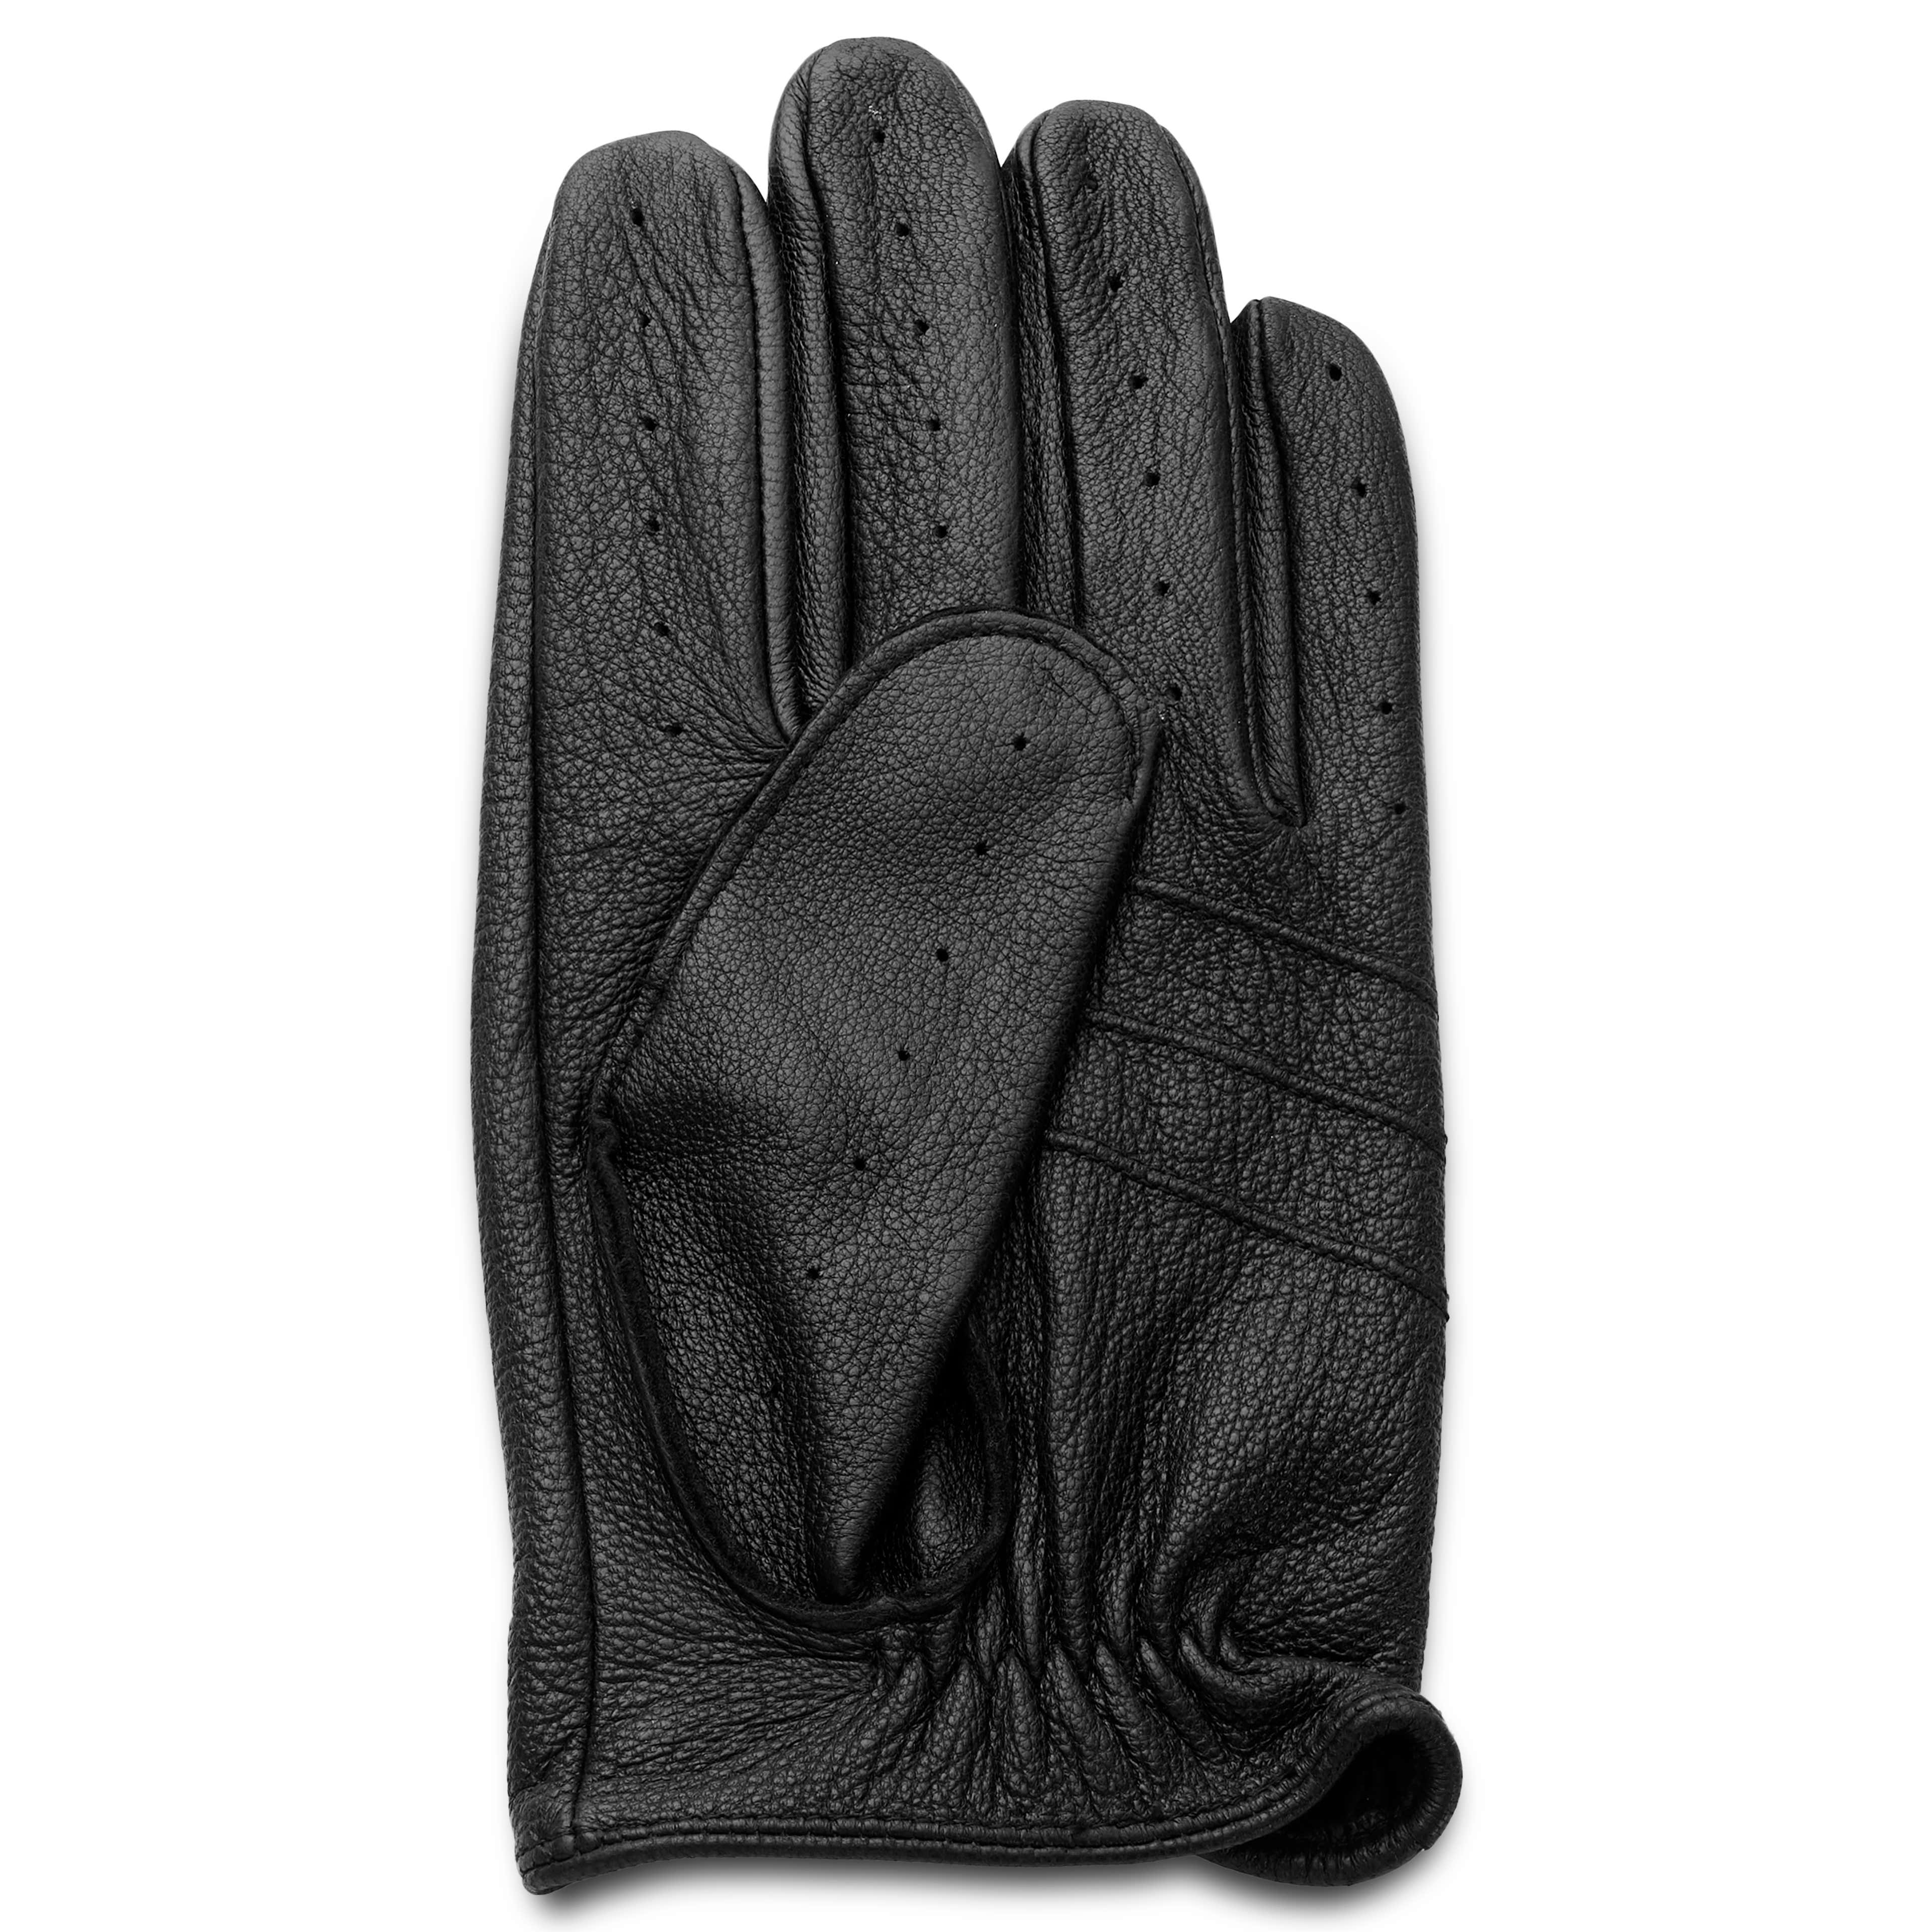 Black Sheep Leather Driving Gloves  - 5 - gallery